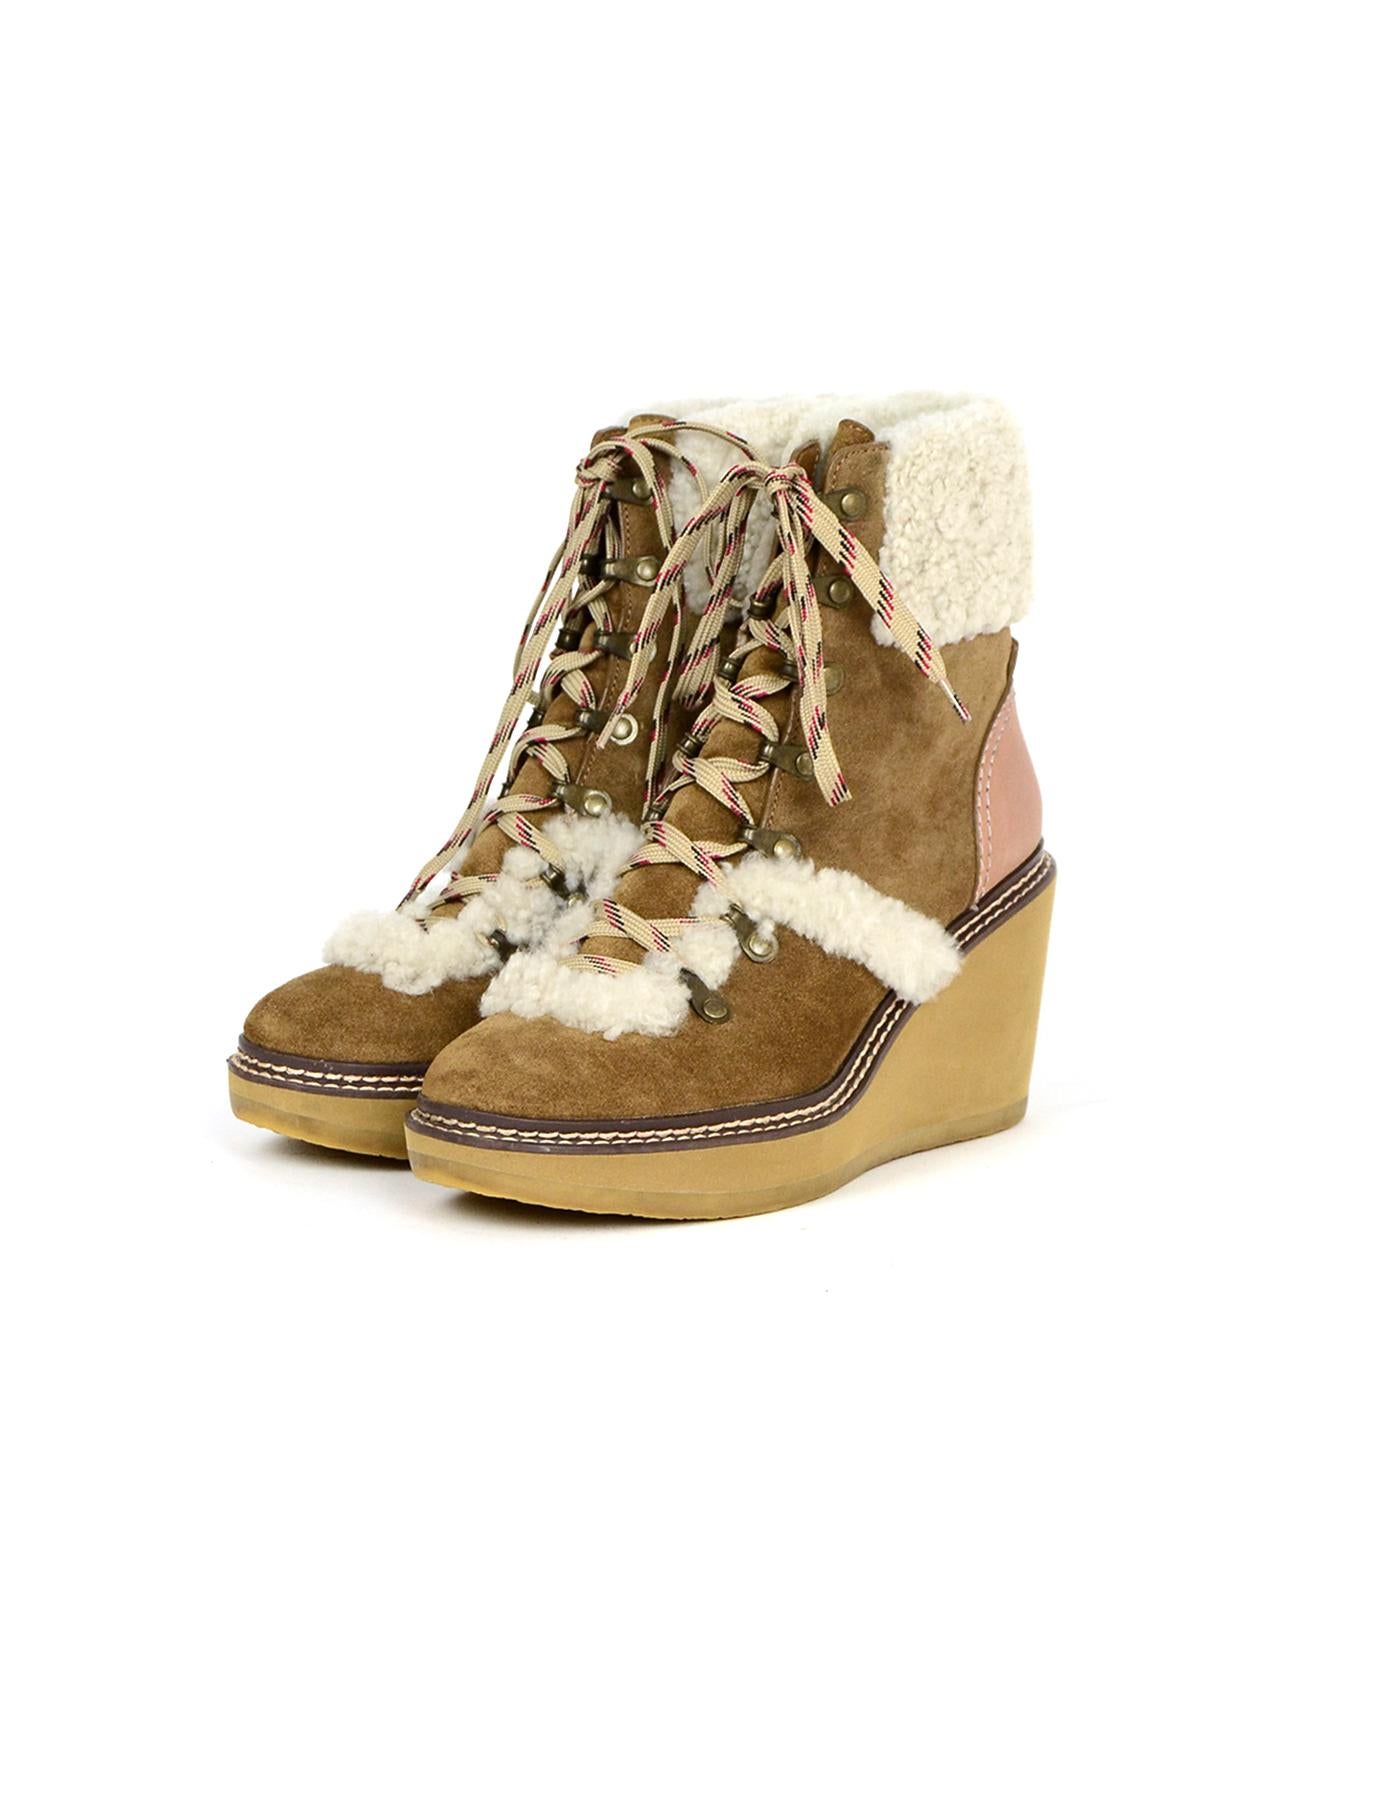 See By Chloe Tan Eileen Shearling-Lined Wedge Hiker Booties sz 39 rt $420

Color: Tan 
Hardware: Antique goldtone hardware
Materials: Leather, shearling lining
Closure/Opening: Lace-up
Overall Condition: Very good pre-owned condition, with small